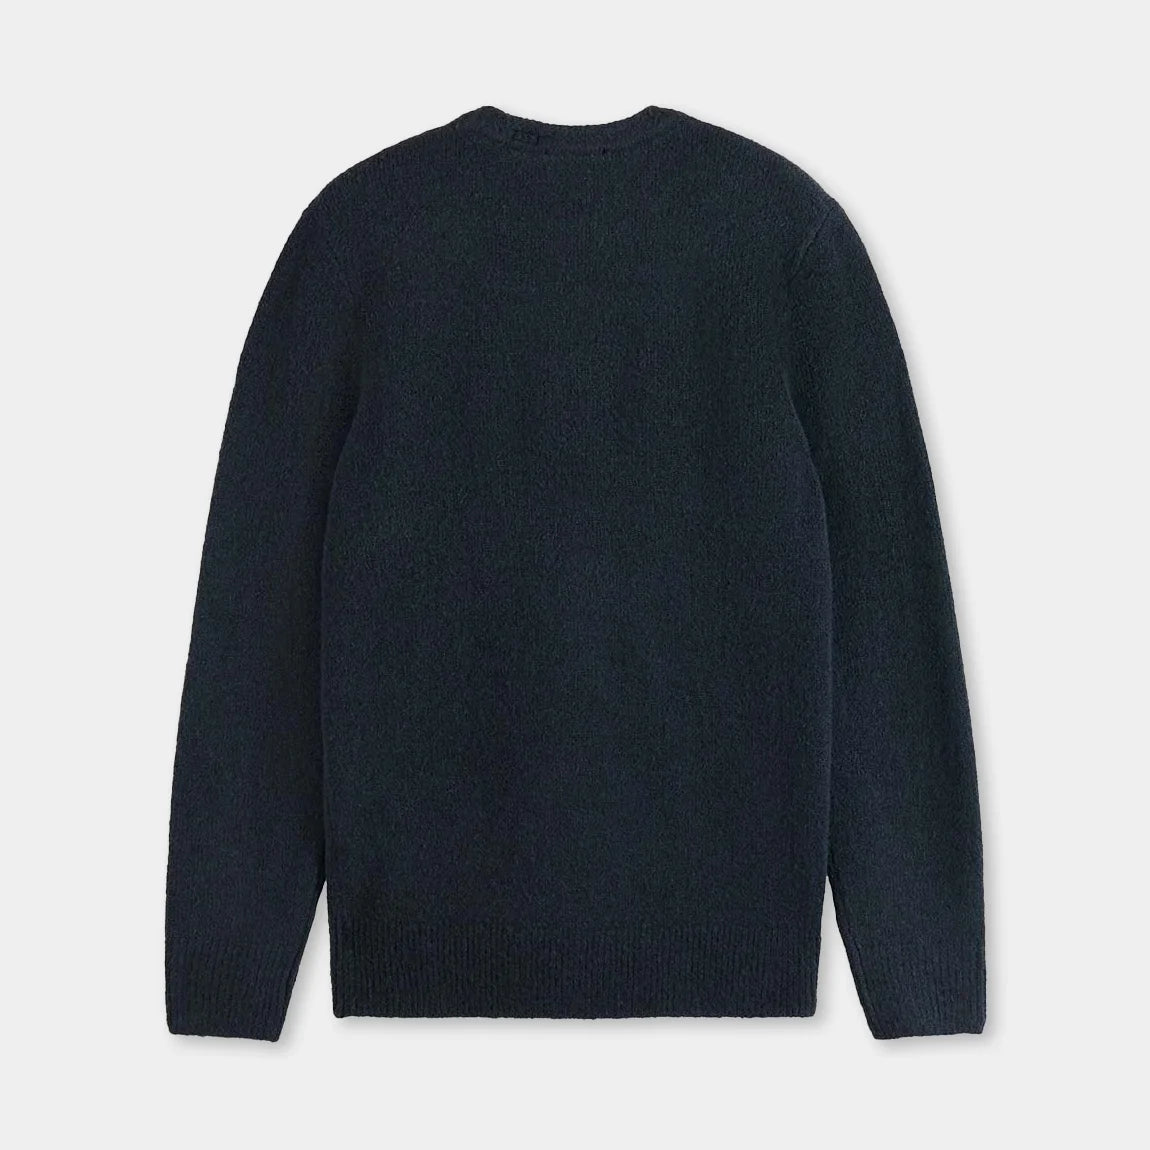 'Scotch & Soda Softy Knit Pullover Sweater' in 'Navy Night' colour